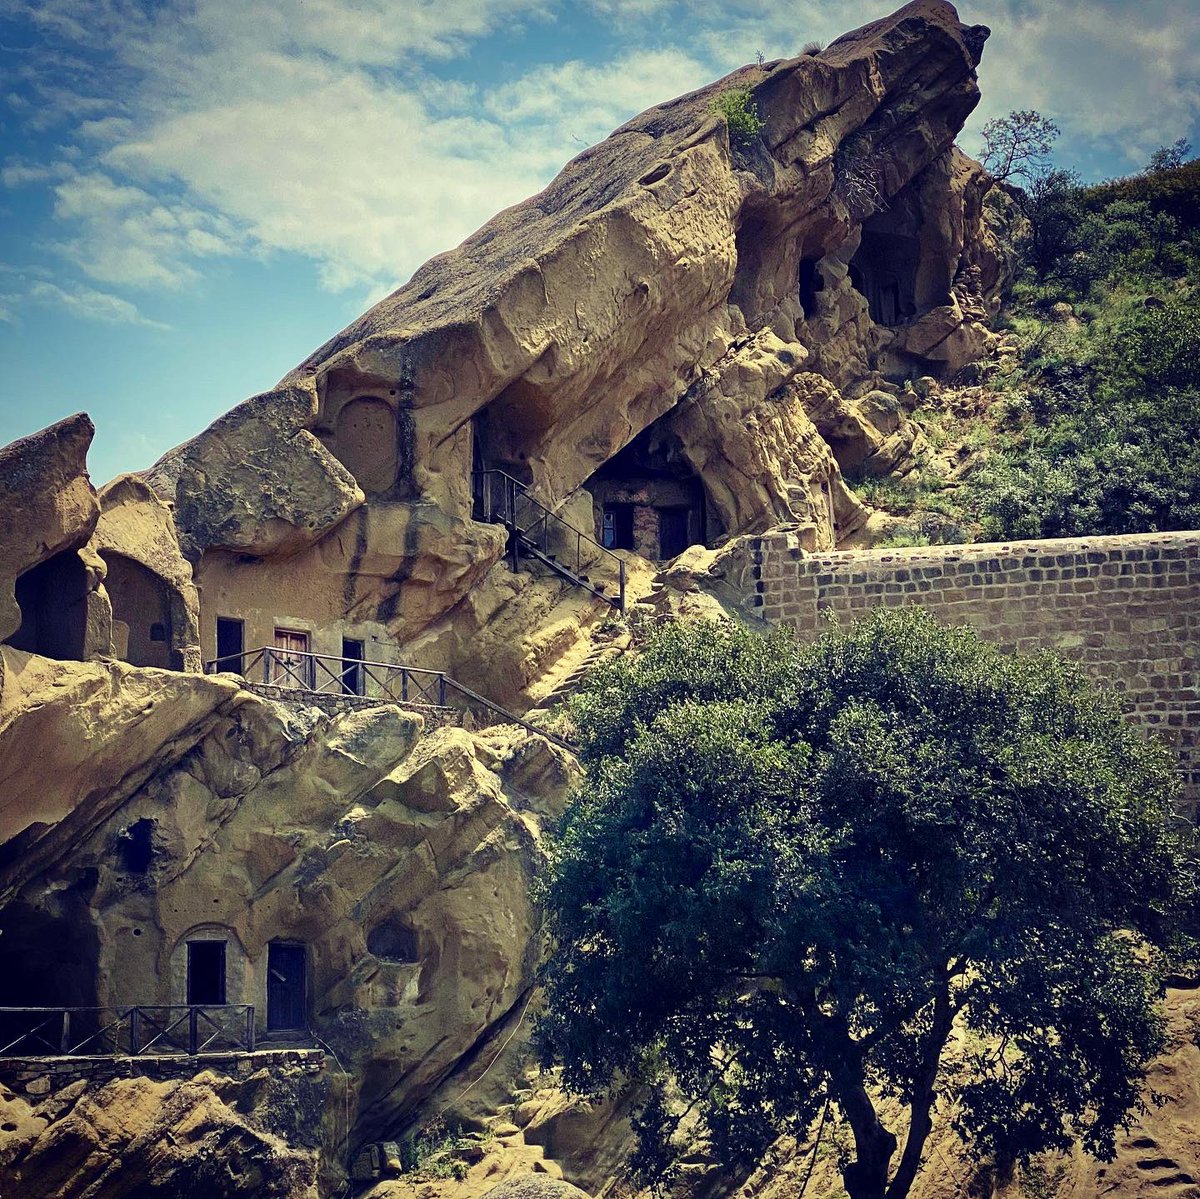 #DavitGareja monastery is such an incredible discovery! A troglodyte monastery in the desert surrounded by beautiful and colorful landscapes. #georgia #georgie #travel #voyage #blogvoyage #photooftheday #travelphotography #naturephotography